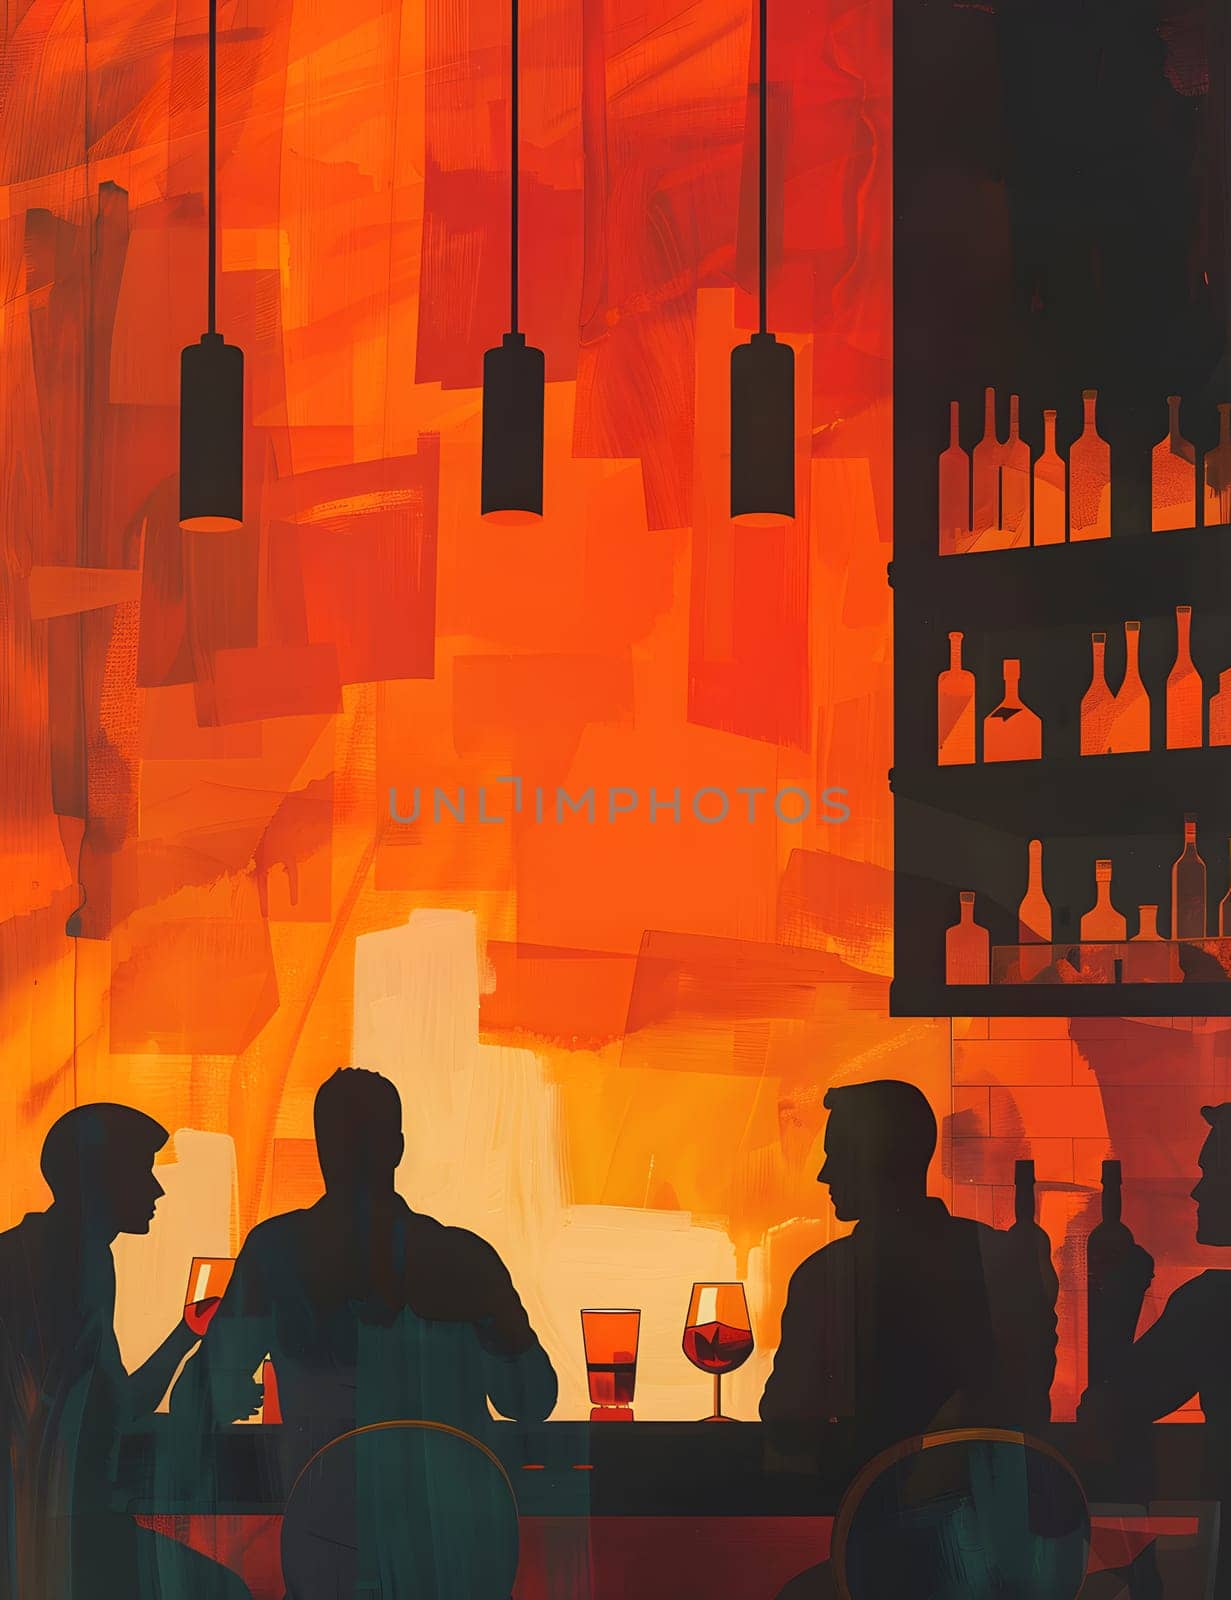 In a building filled with amber light, a group of people sit at a bar sipping on red wine. The art on the walls is a world of orange tints and shades